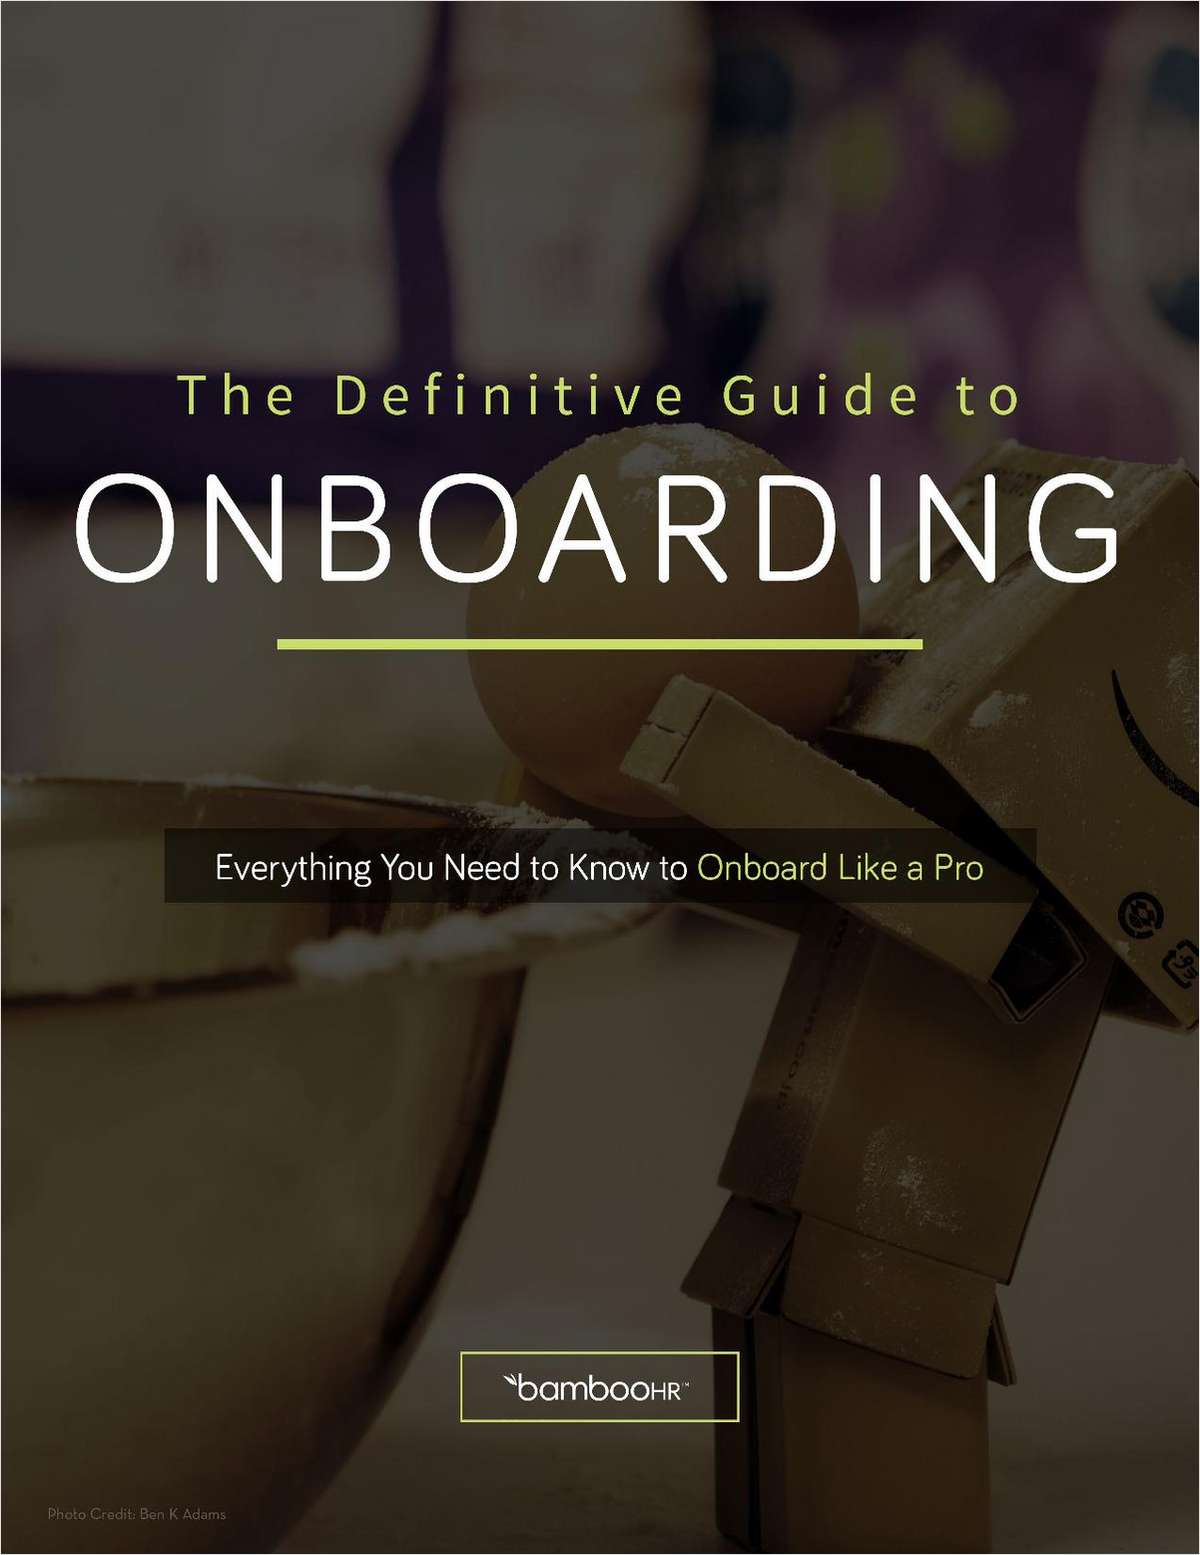 The Definitive Guide to Onboarding